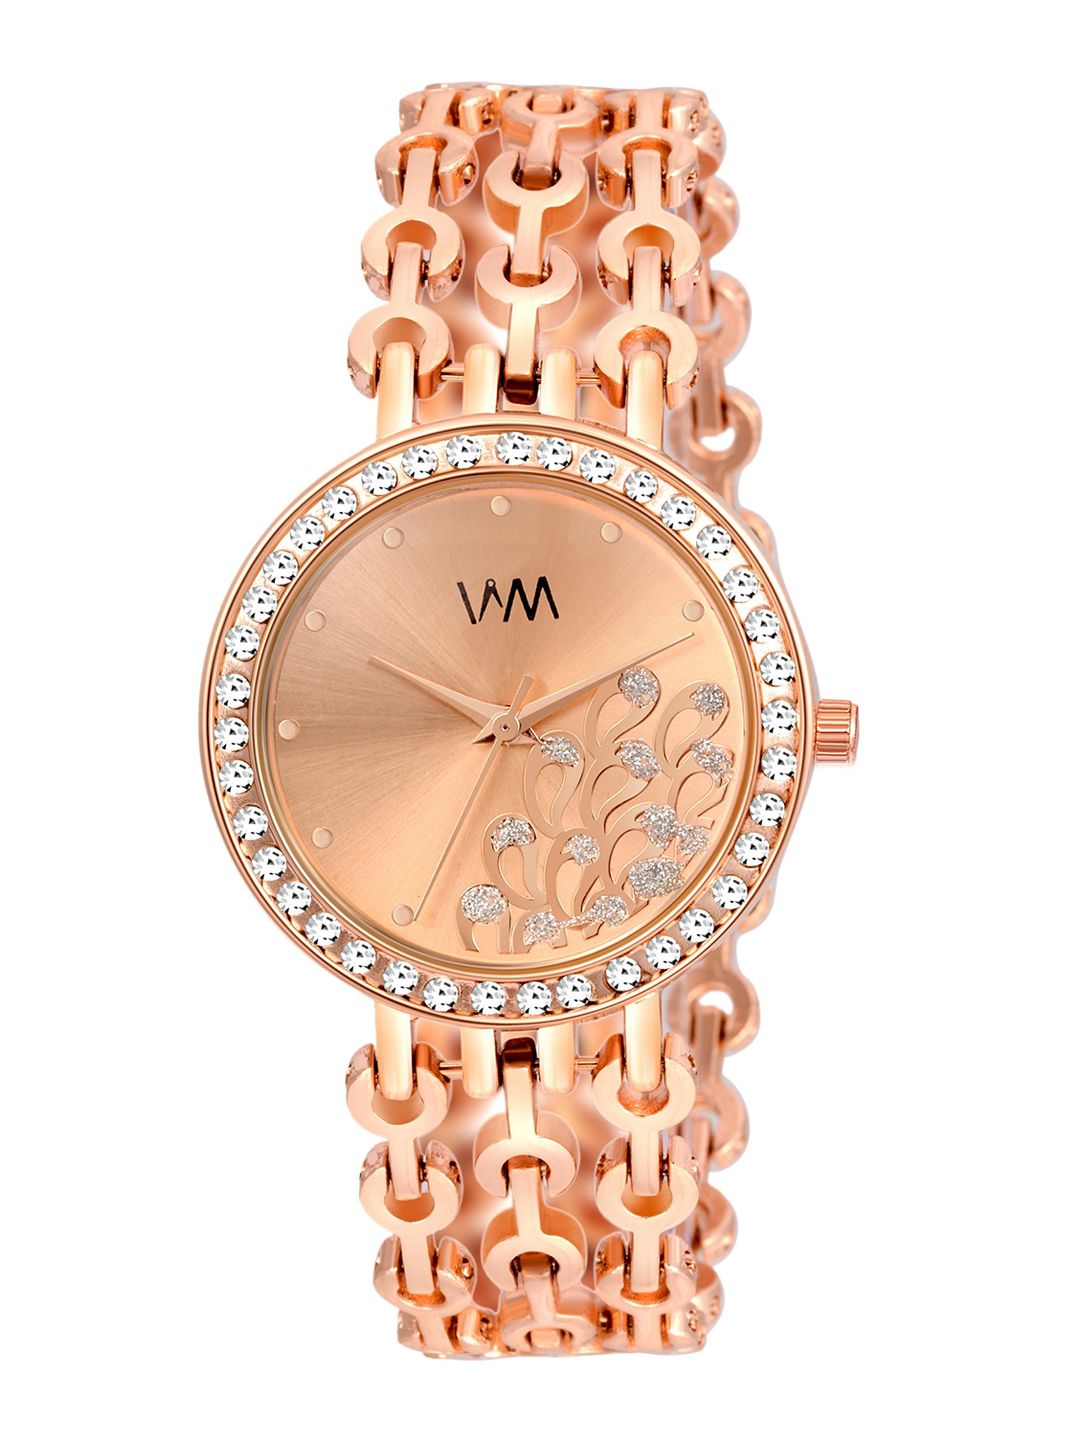 Watch Me Rose Gold-Toned Embellished Dial & Bracelet Style Straps Analogue Watches PP-041 Price in India